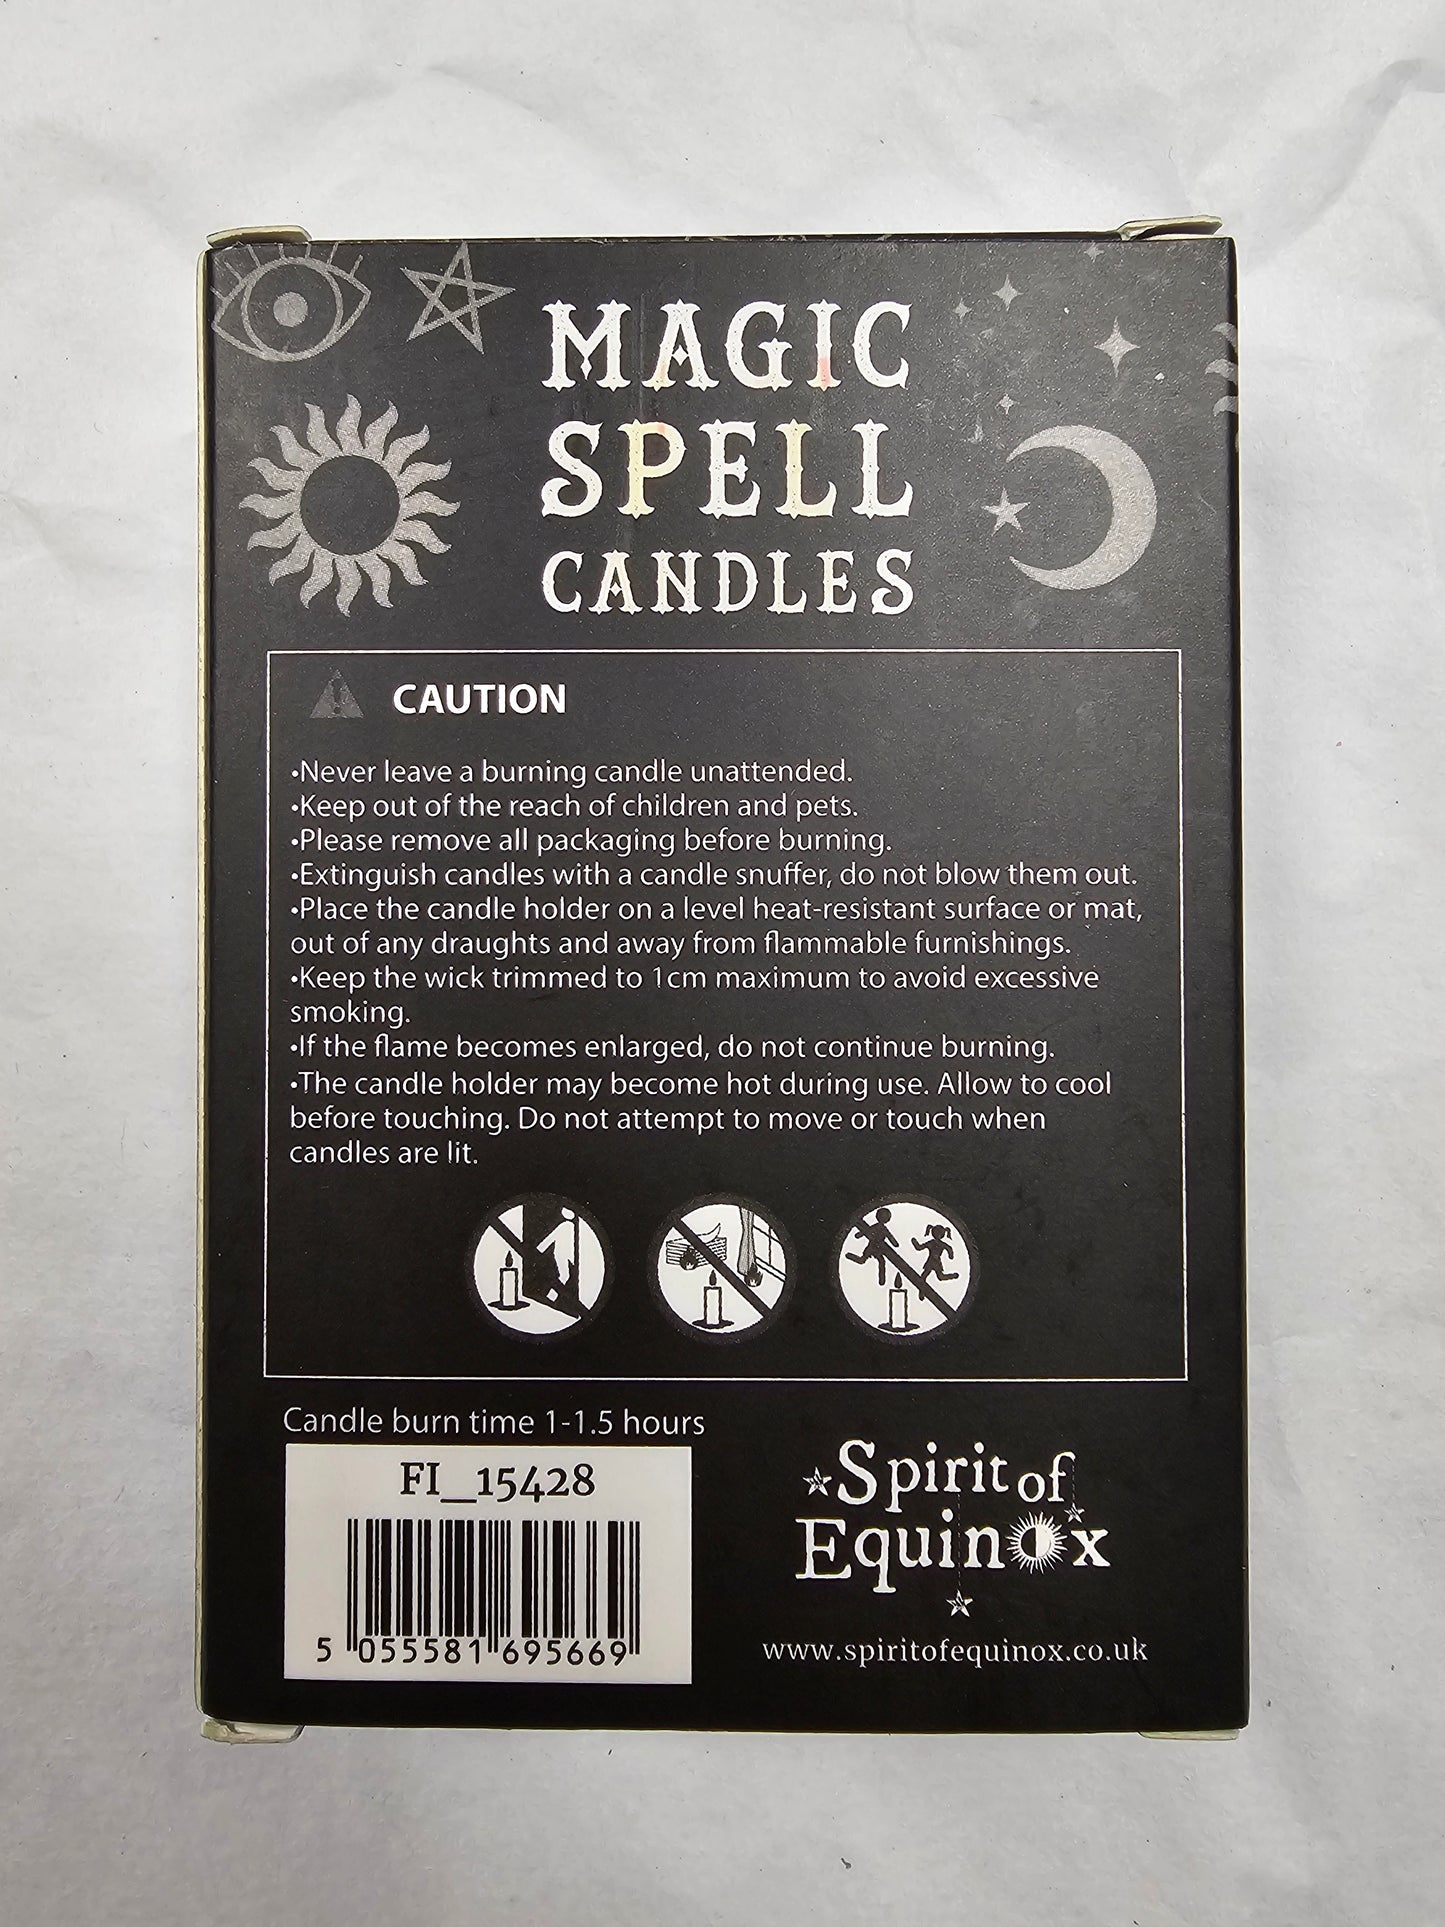 Red spell candles (love)